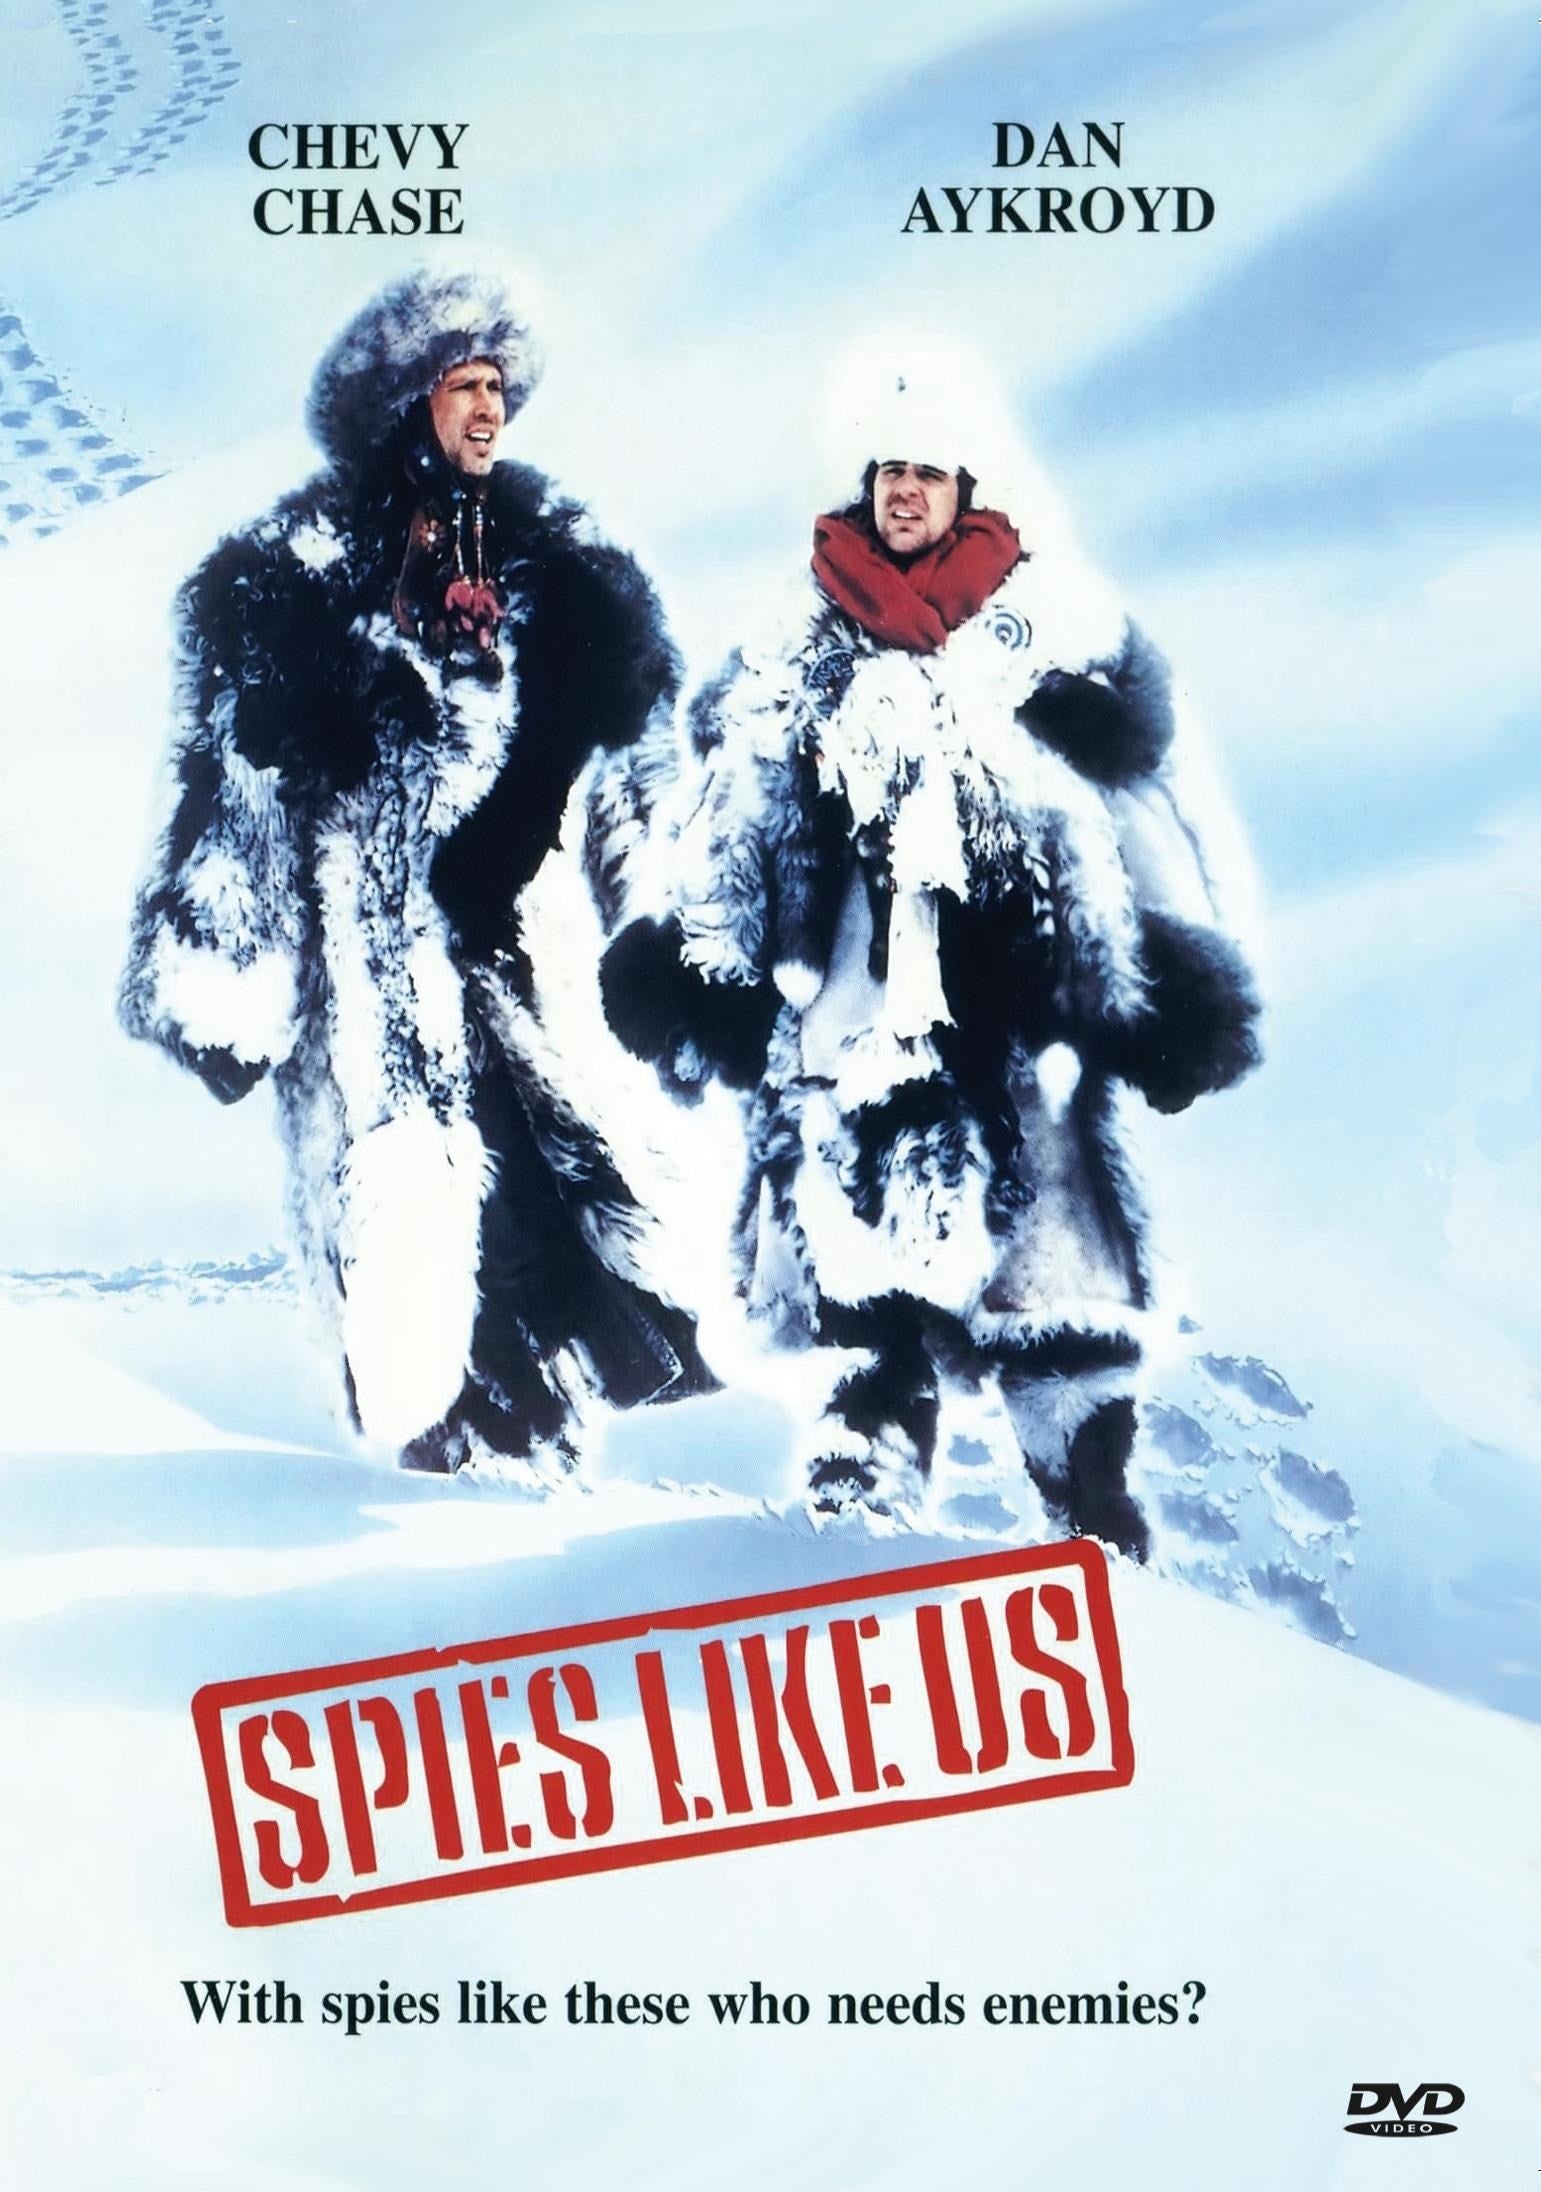 Spies Like Us rareandcollectibledvds